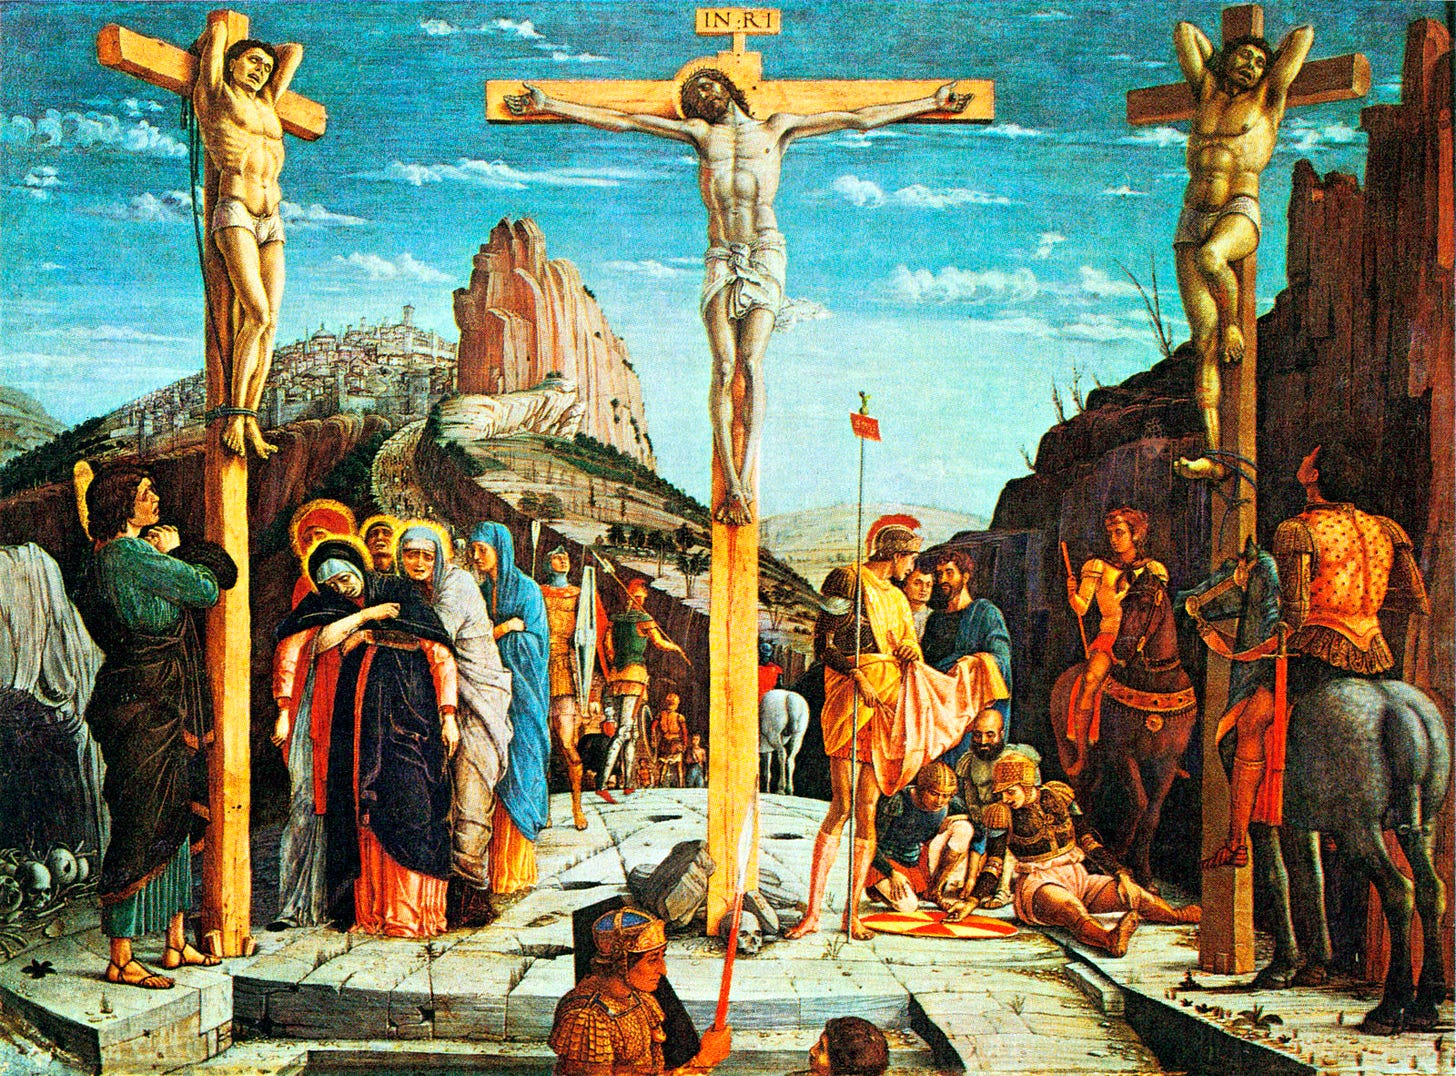 INFINITY NOW: Was Jesus Crucified in the Manner Shown in Paintings and  Movies?